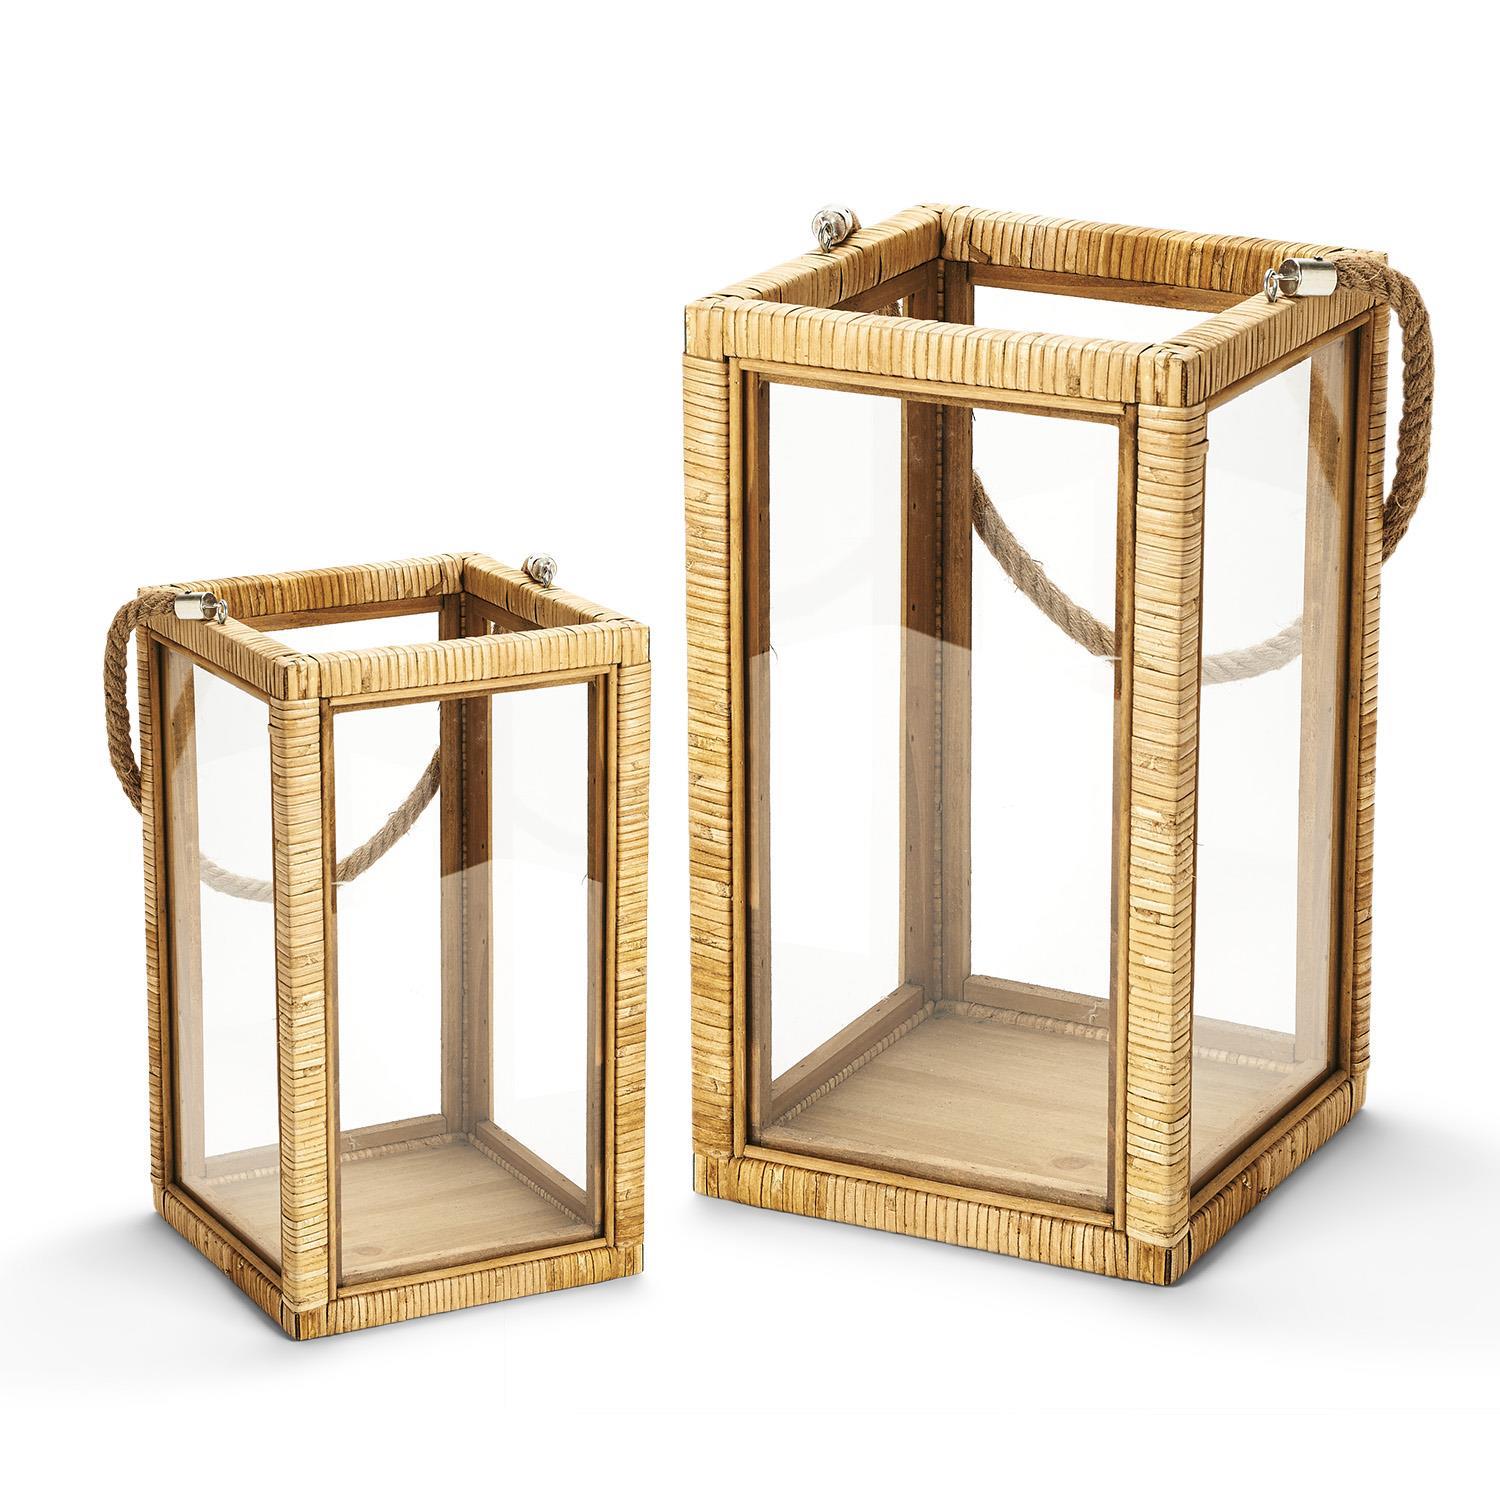 Set of 2 Decorative Rattan Lanterns with Rope Handle Home Decor Two's Company   